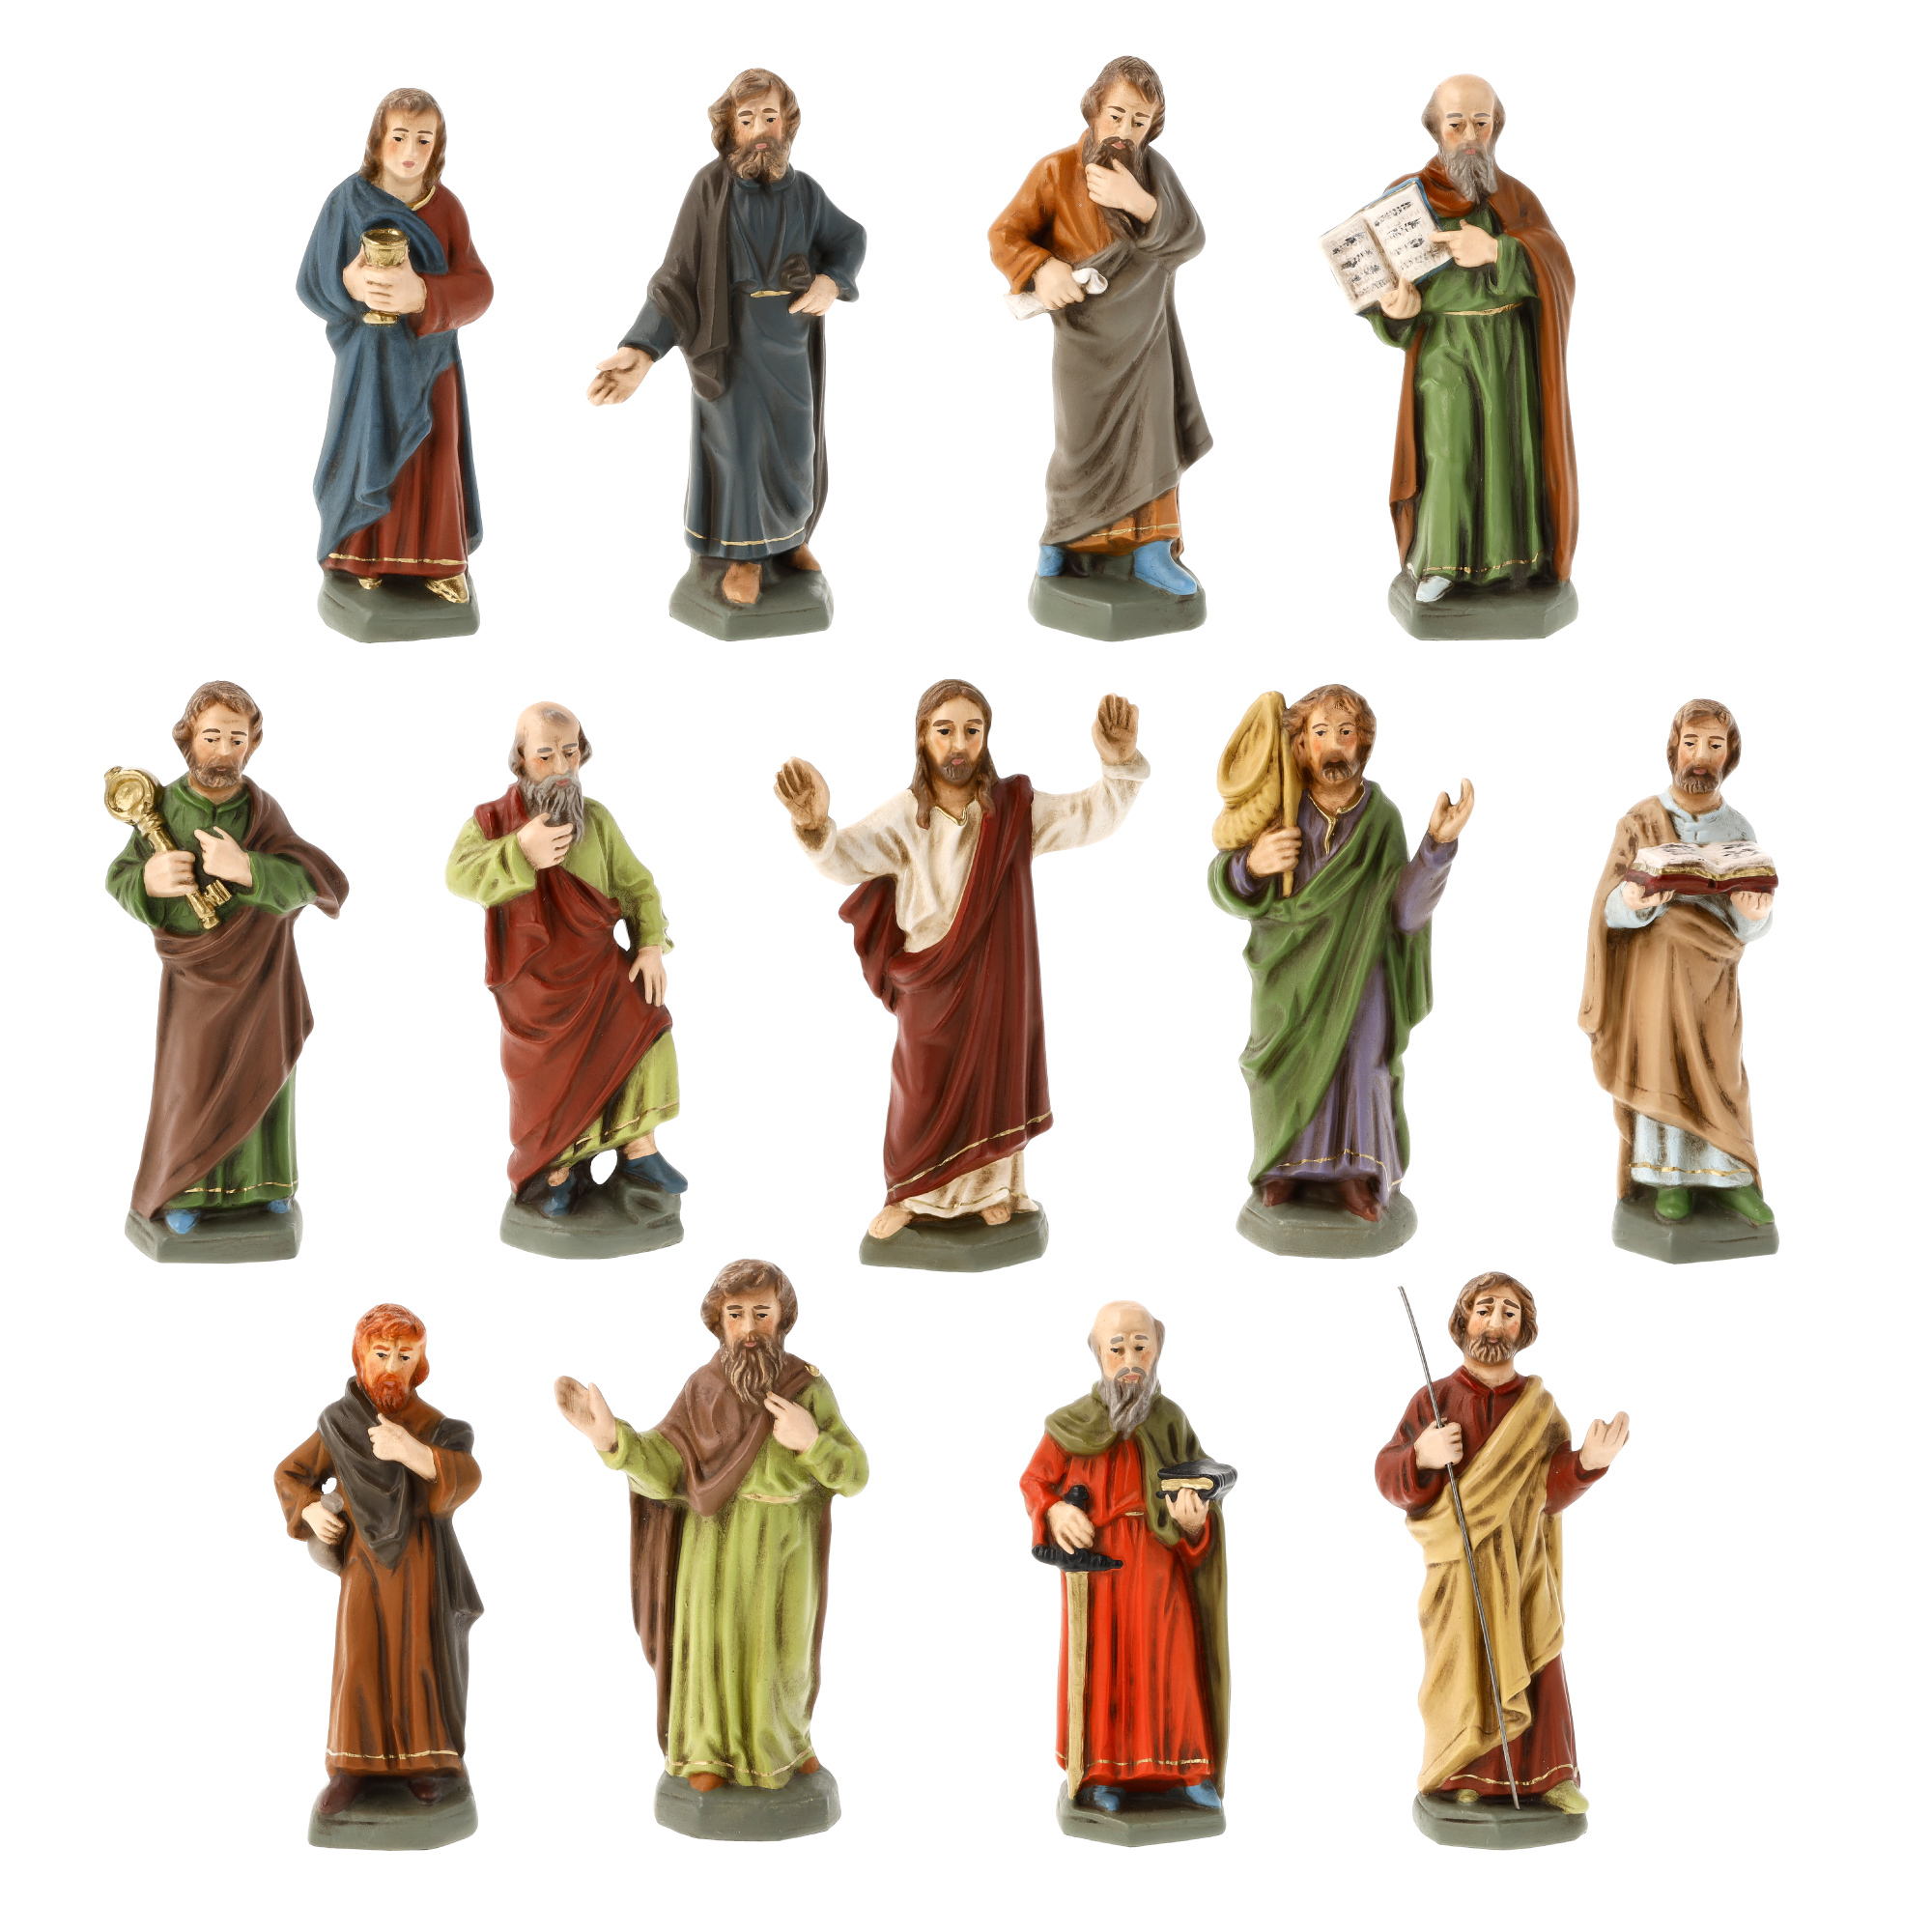 Jesus and his Apostles, 13 figures, to 4.5 in. figures